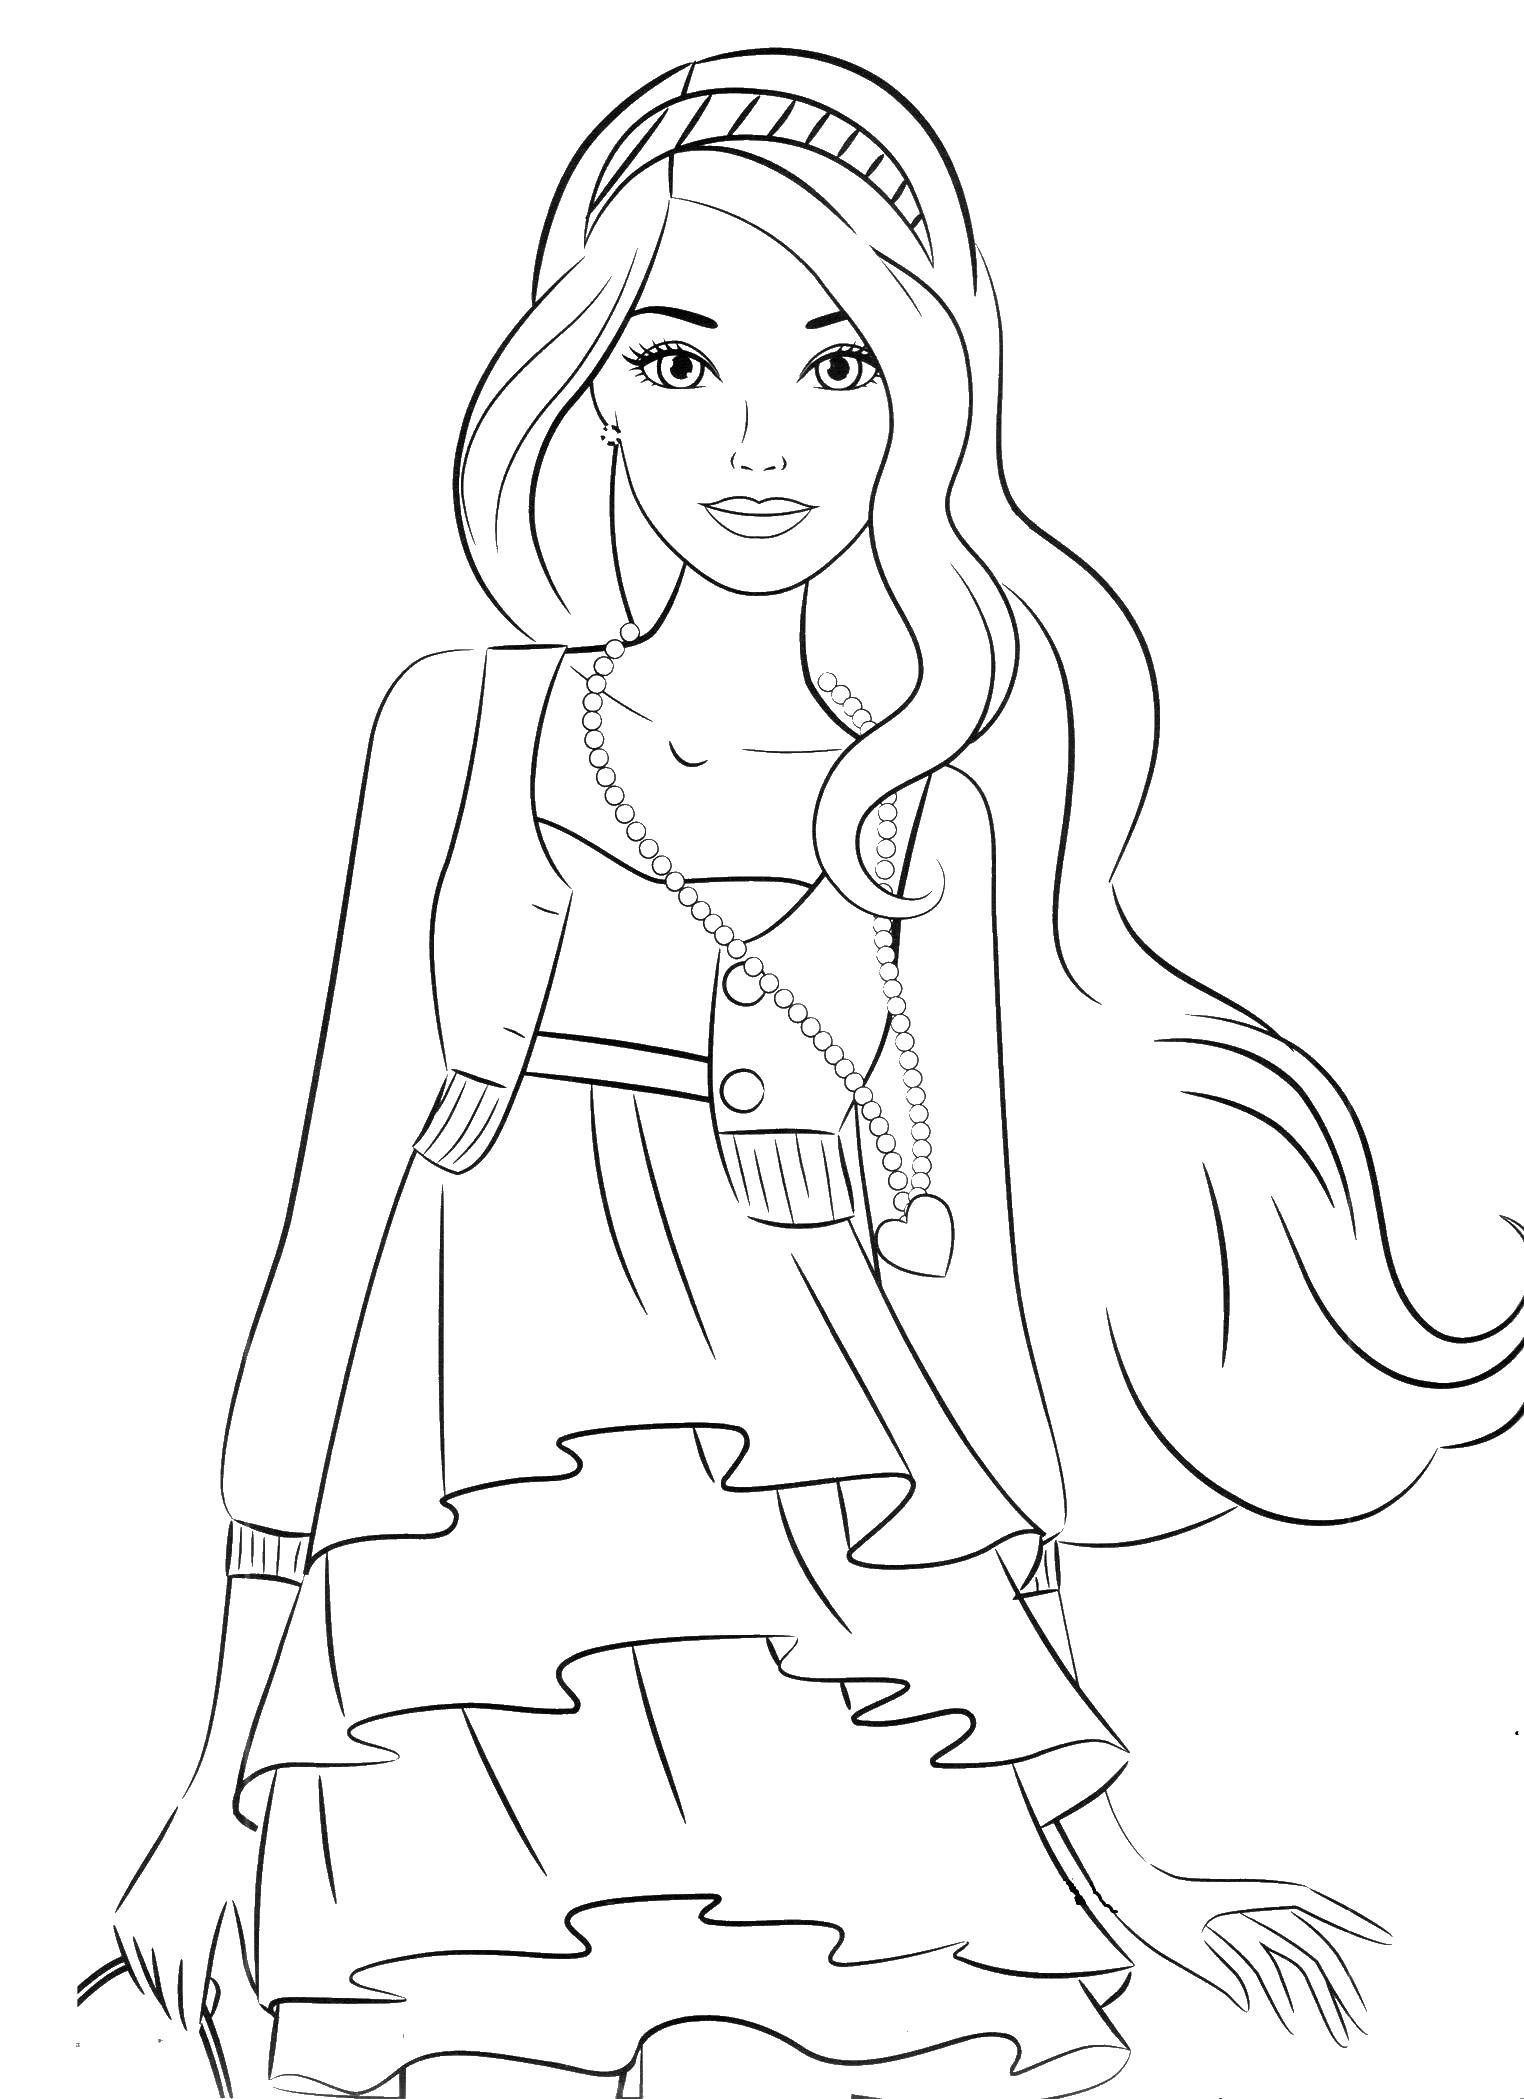 Coloring Barbie in a beautiful dress. Category Barbie . Tags:  girls, Barbie, doll.